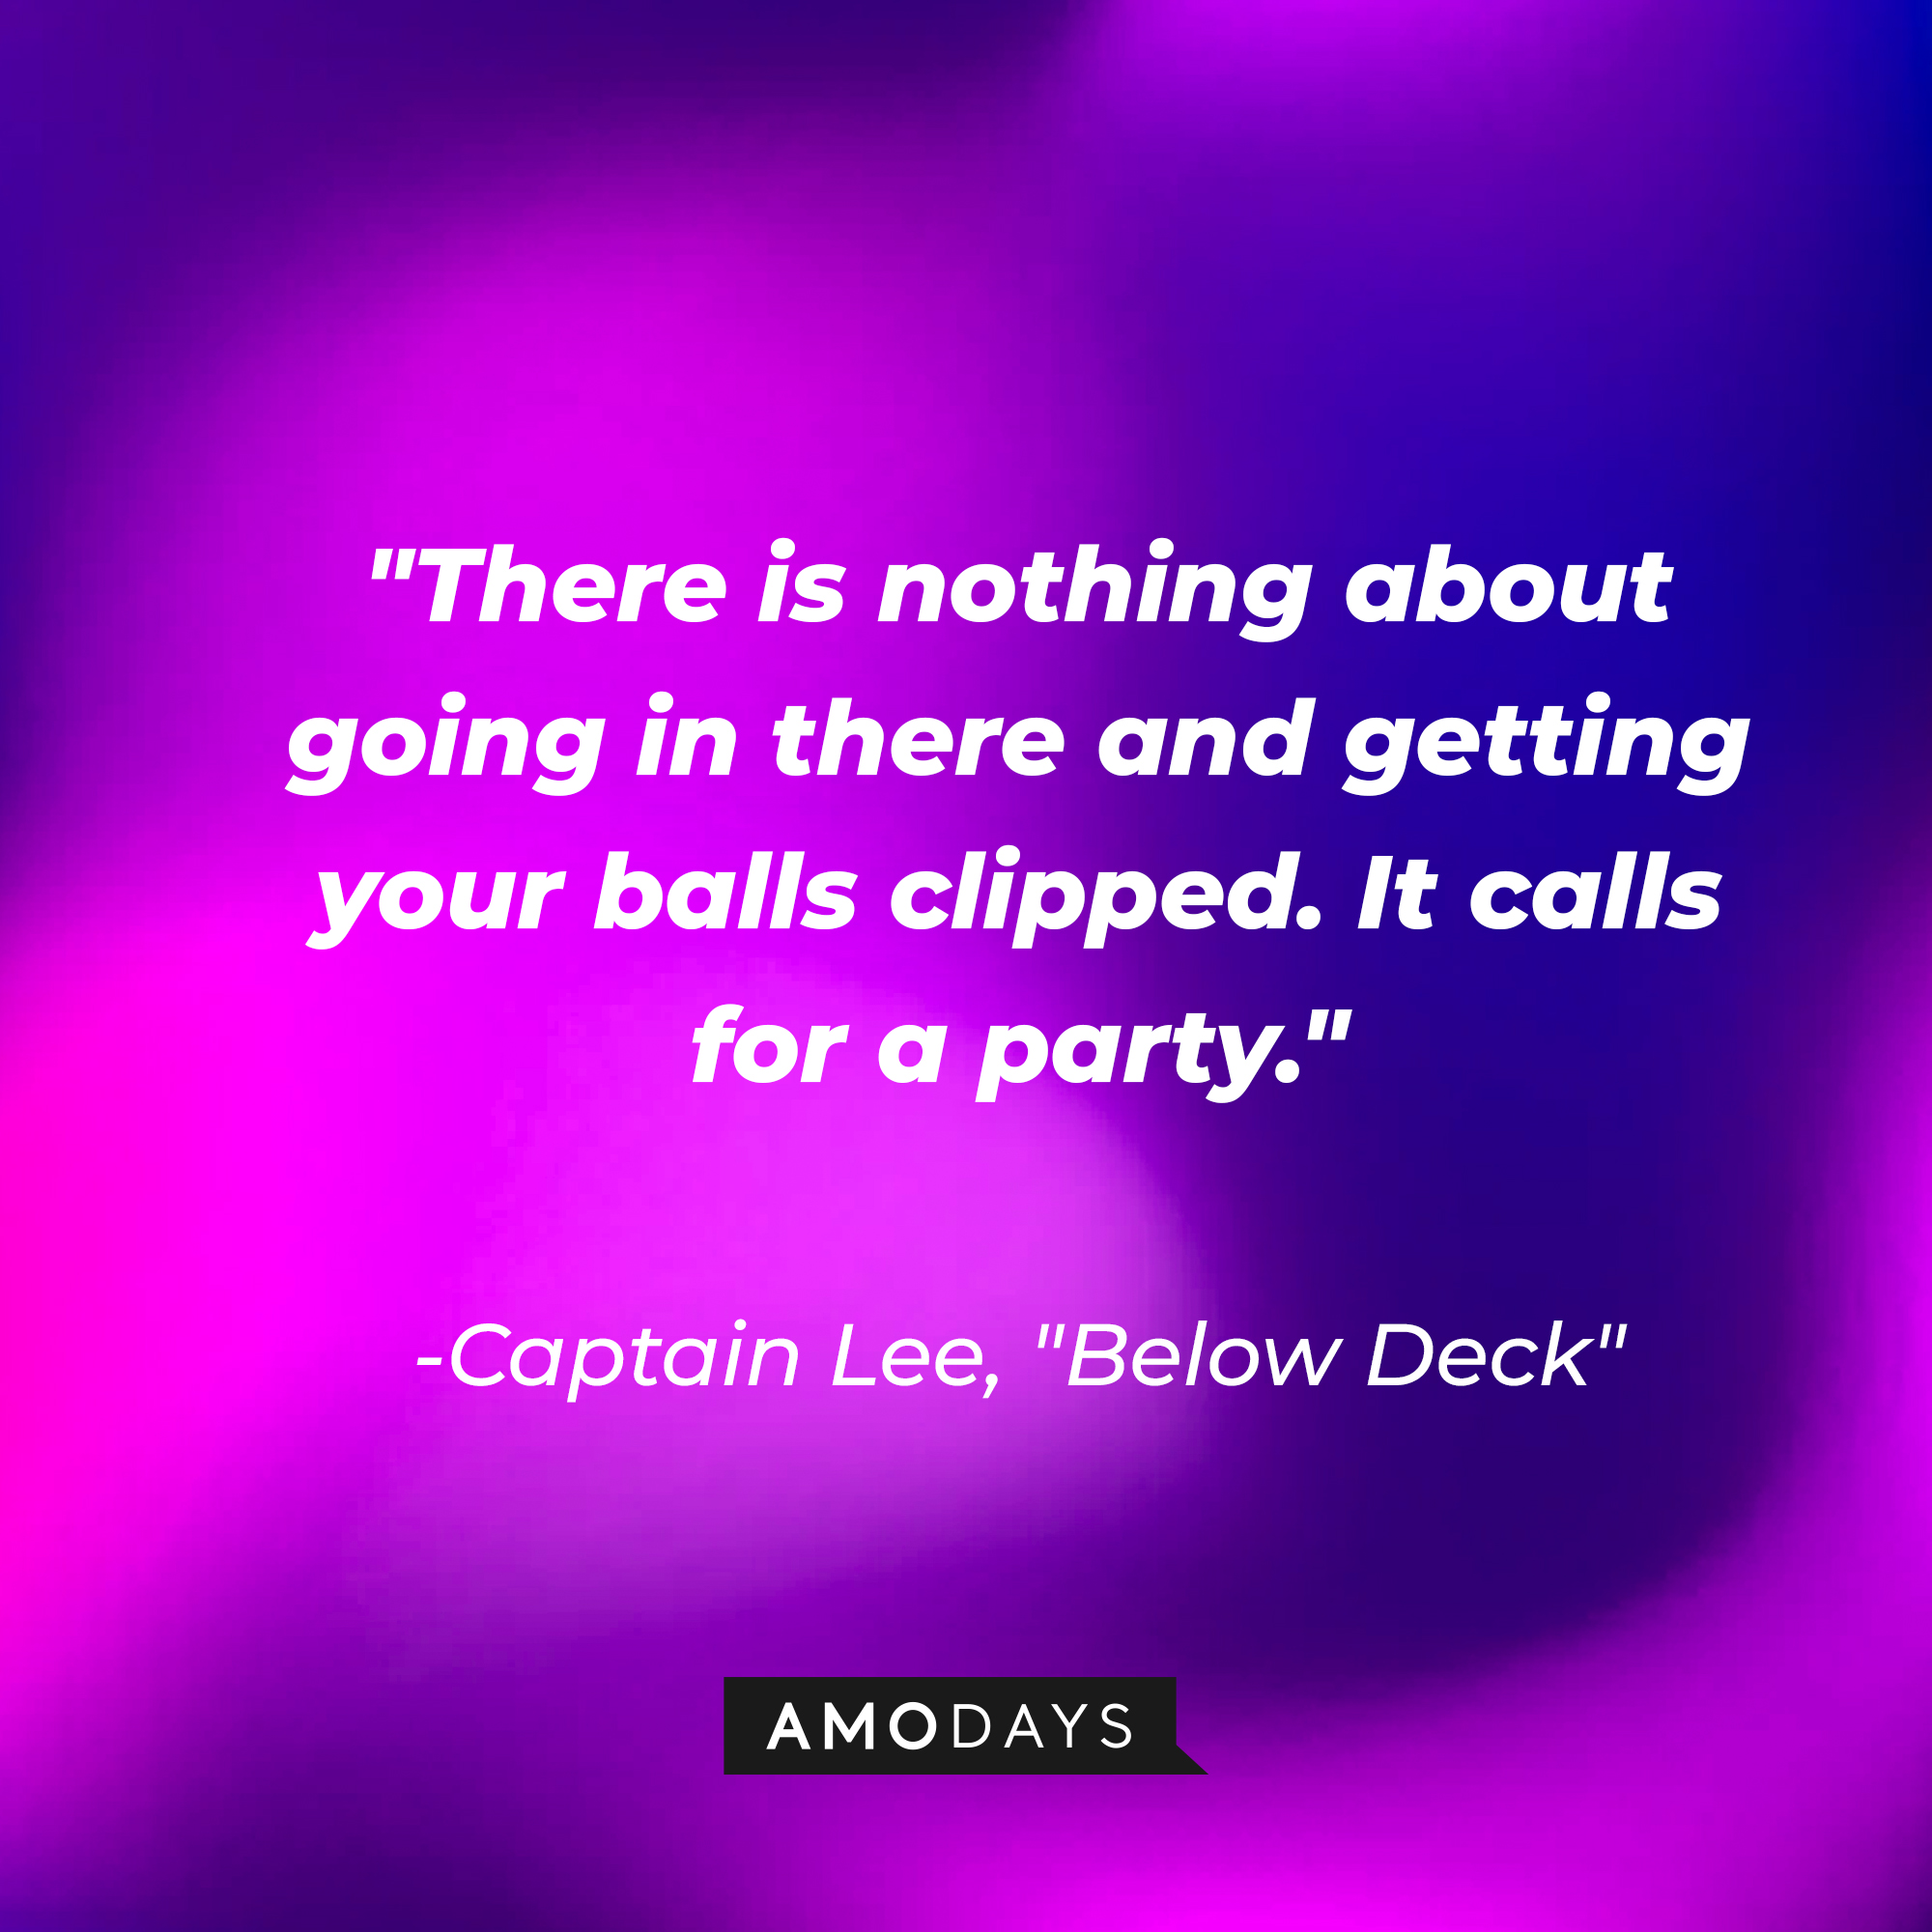 Captain Lee's quote from "Below Deck:" "There is nothing about going in there and getting your balls clipped. It calls for a party."  | Source: AmoDays